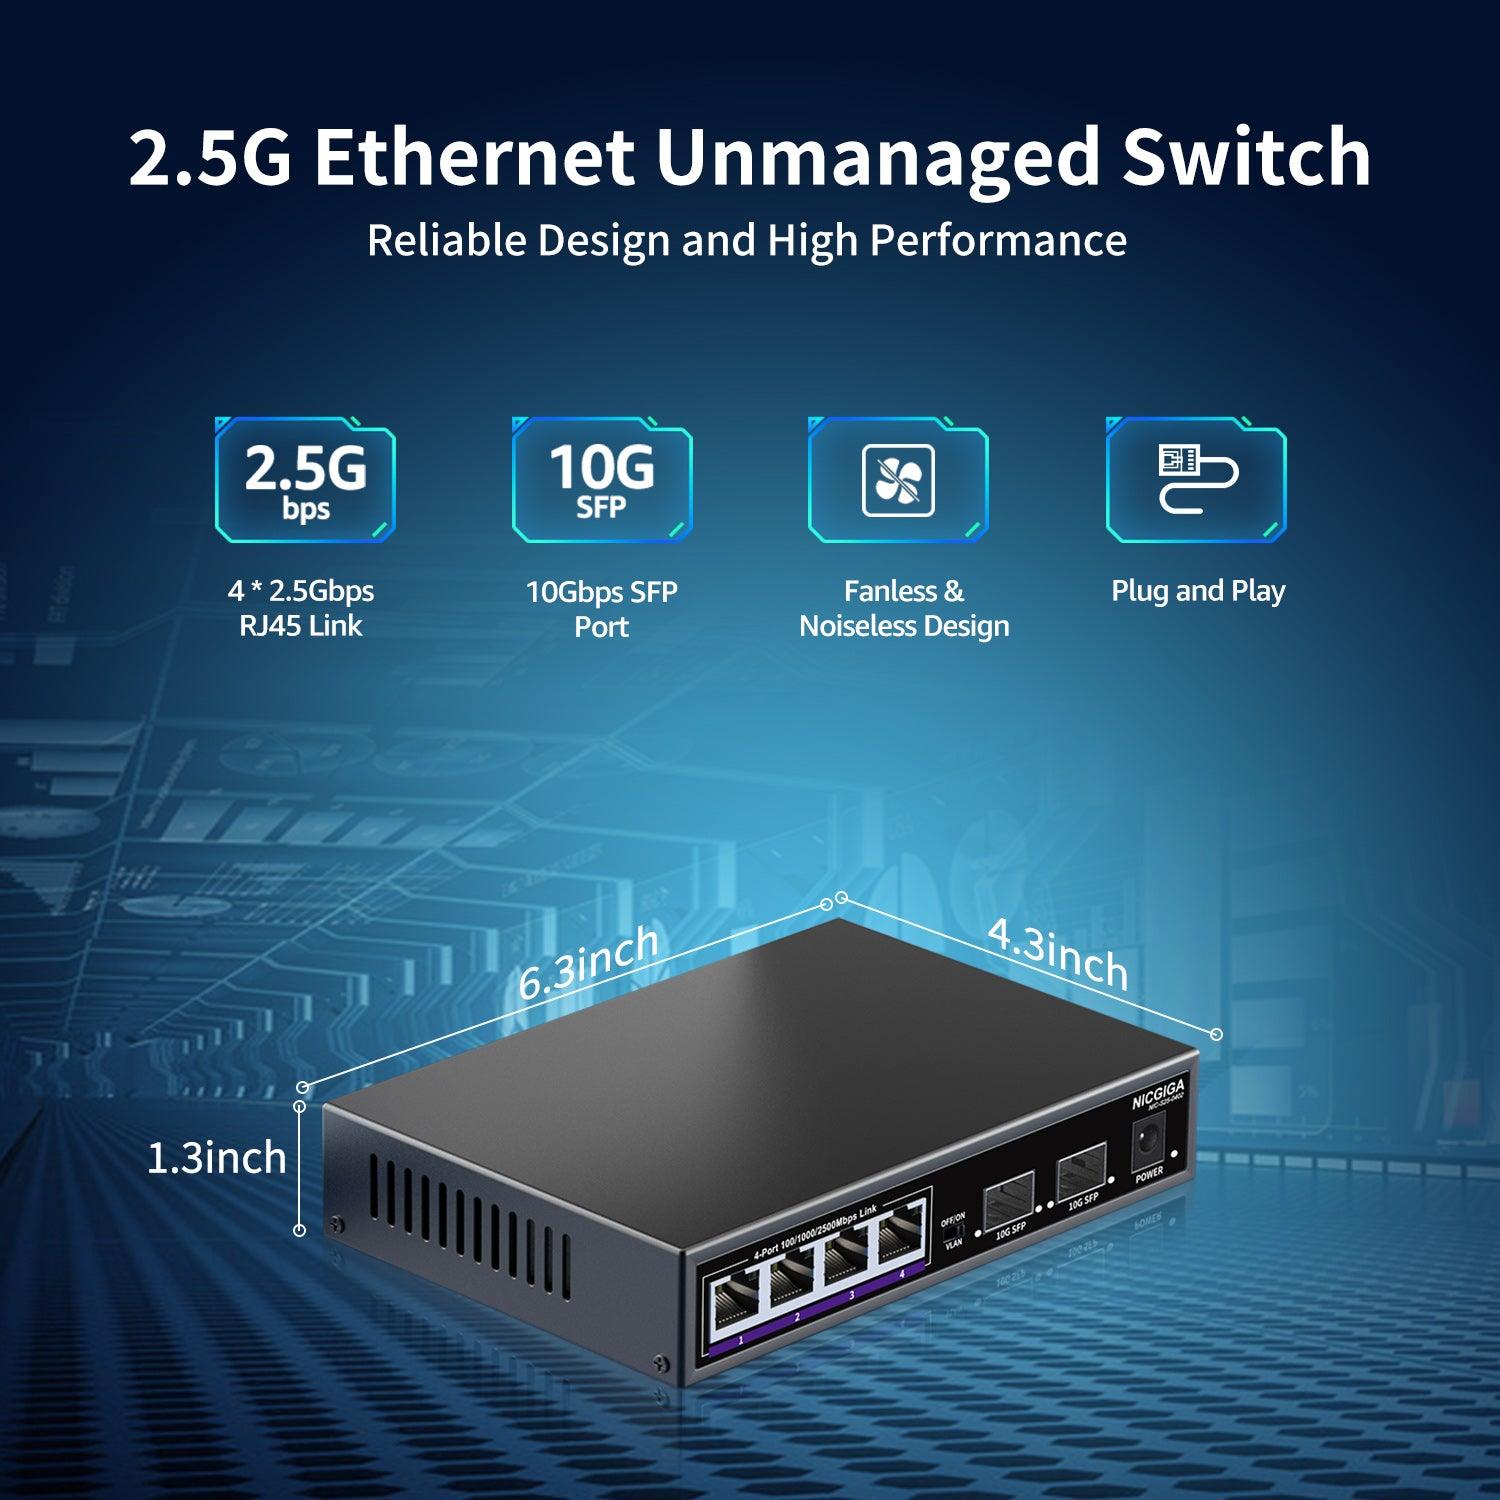 What is a 2.5G Ethernet switch?